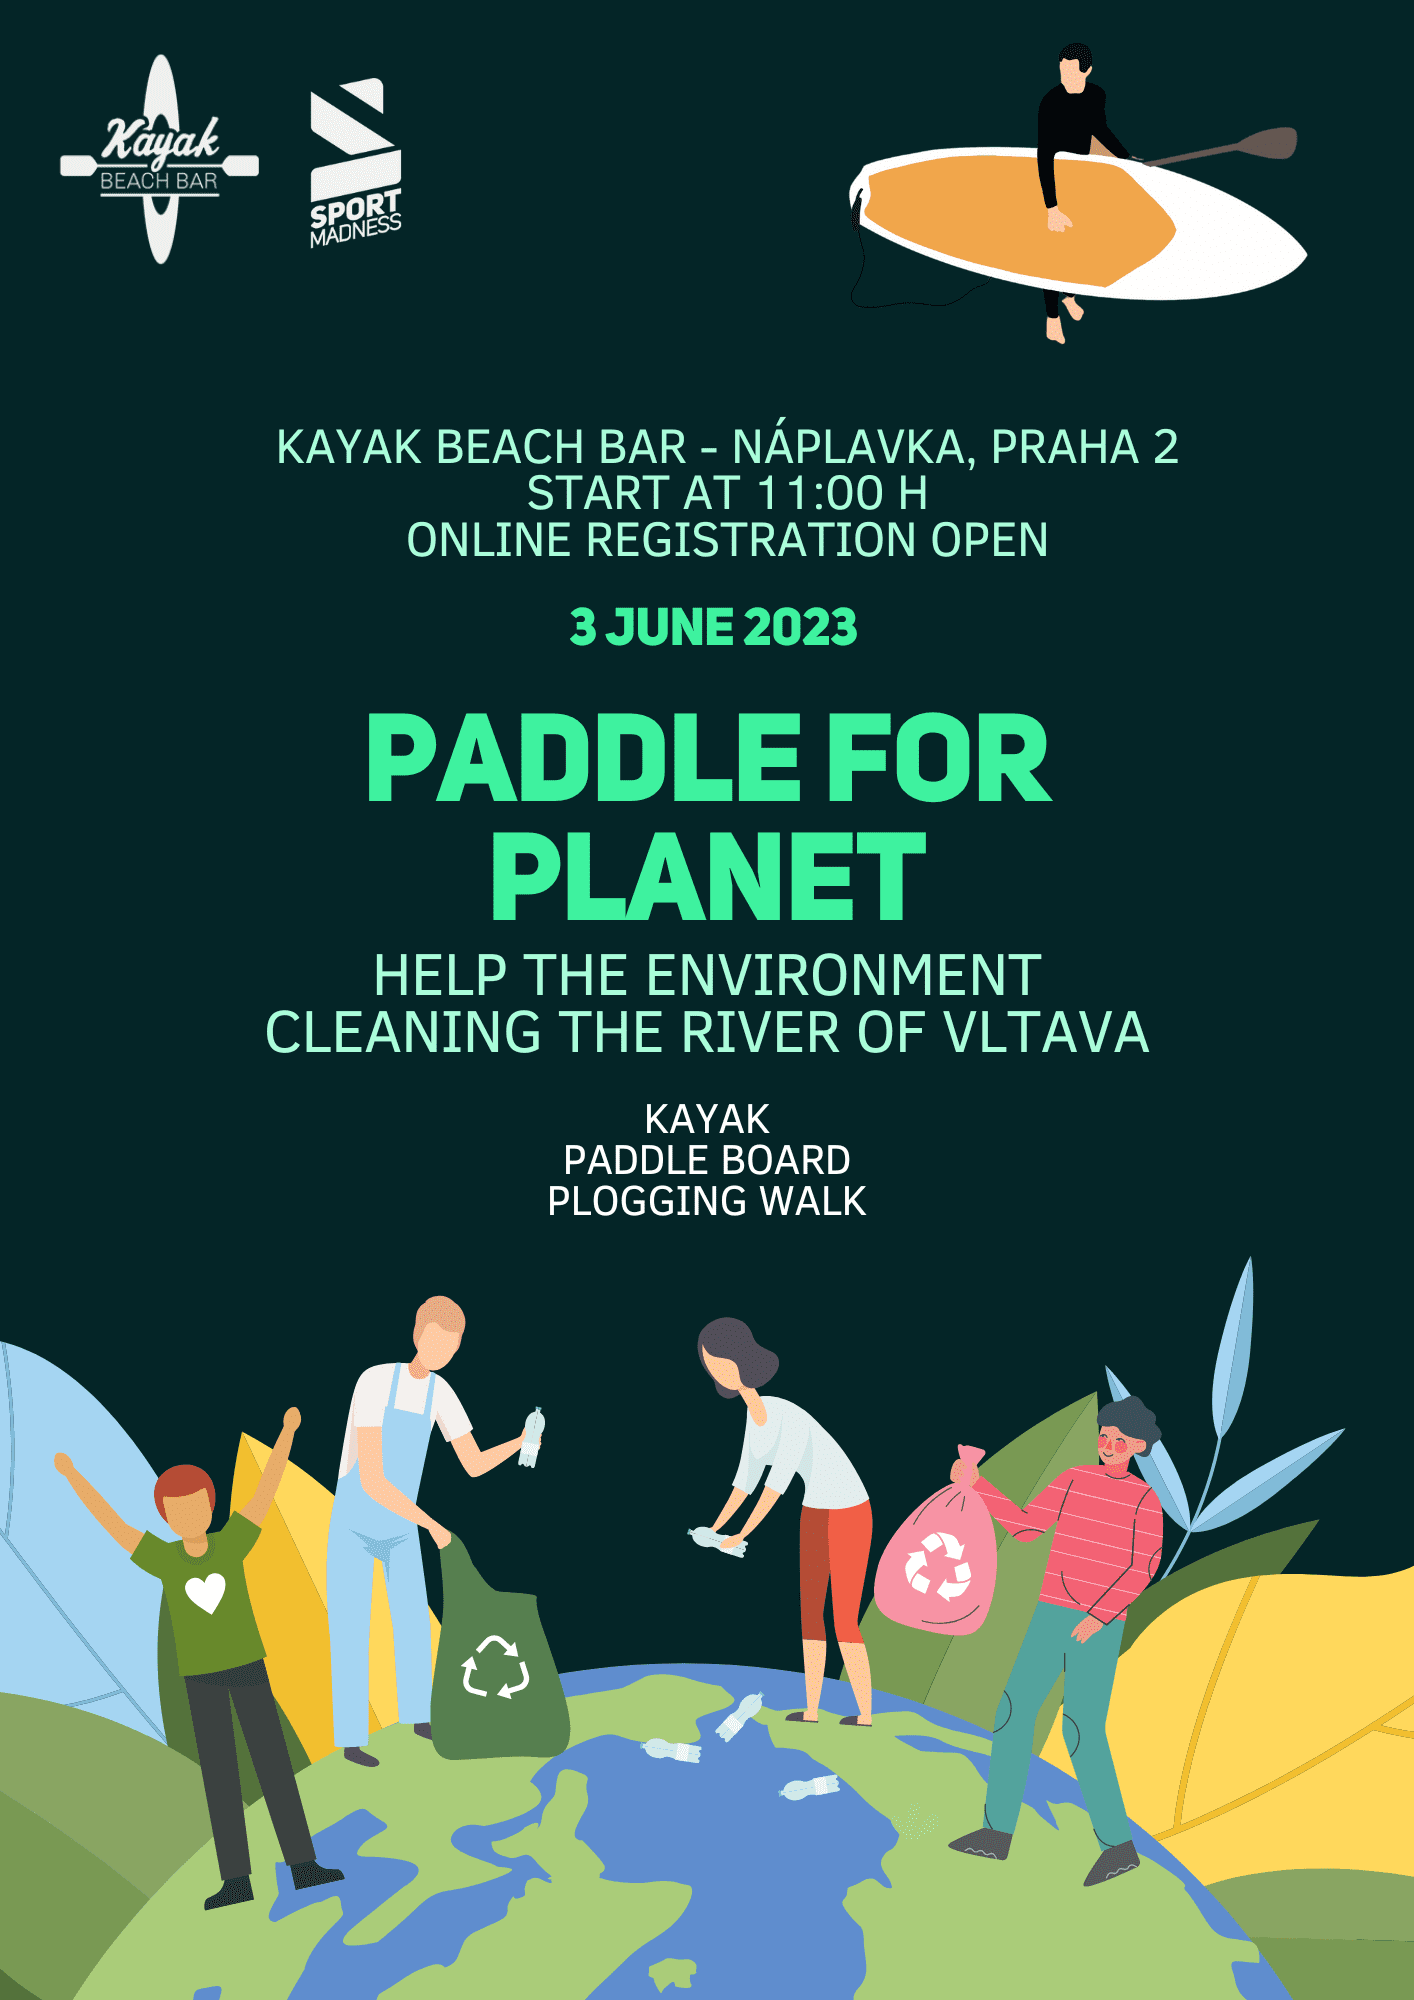 PADDLE FOR PLANET